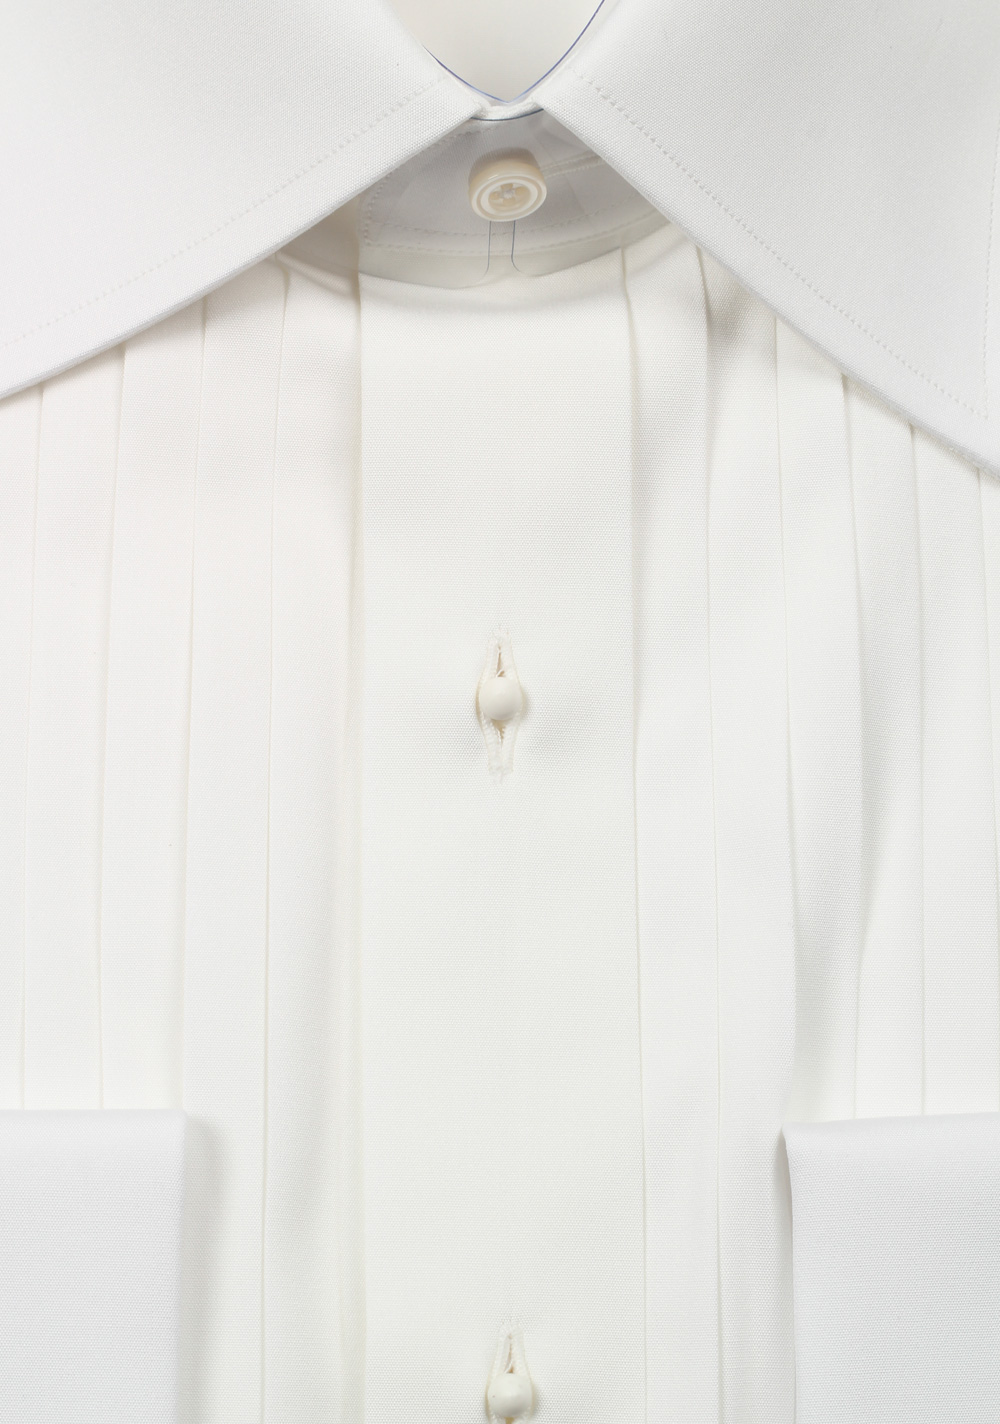 TOM FORD Solid White Tuxedo Shirt Size 43 / 17 U.S. | Costume Limité